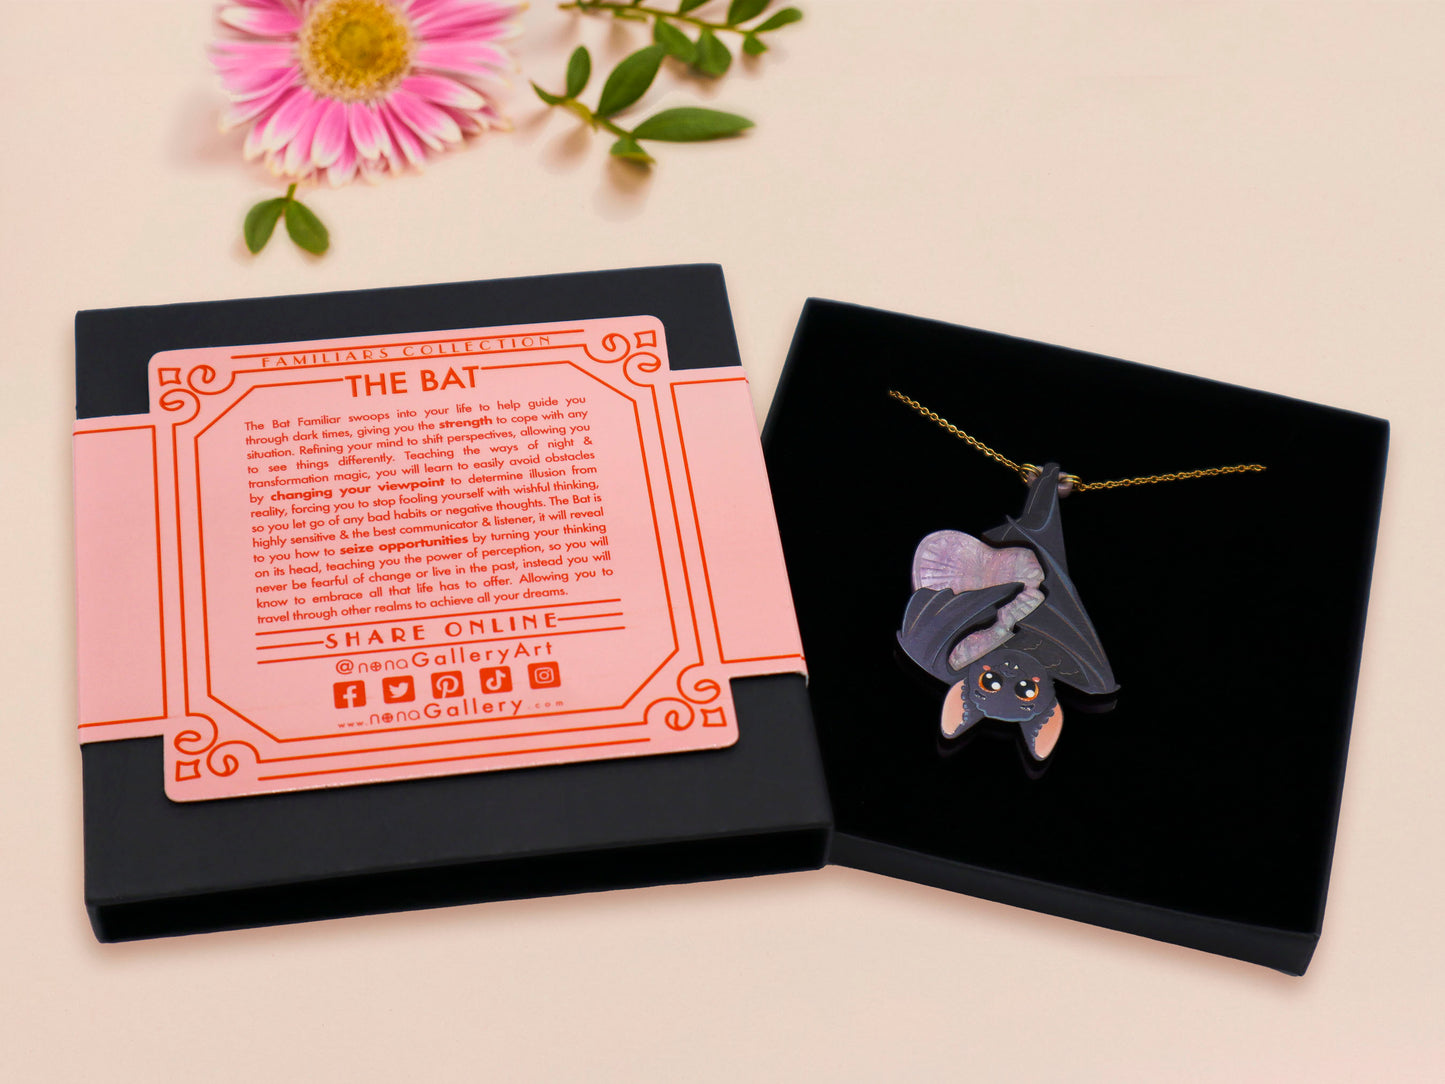 Mixed material handmade necklace of chibi cartoon bat hanging upside down holding a pearlescent Ouija planchette, with a gold chain and black gift box with a pink familiars collection gift sleeve.